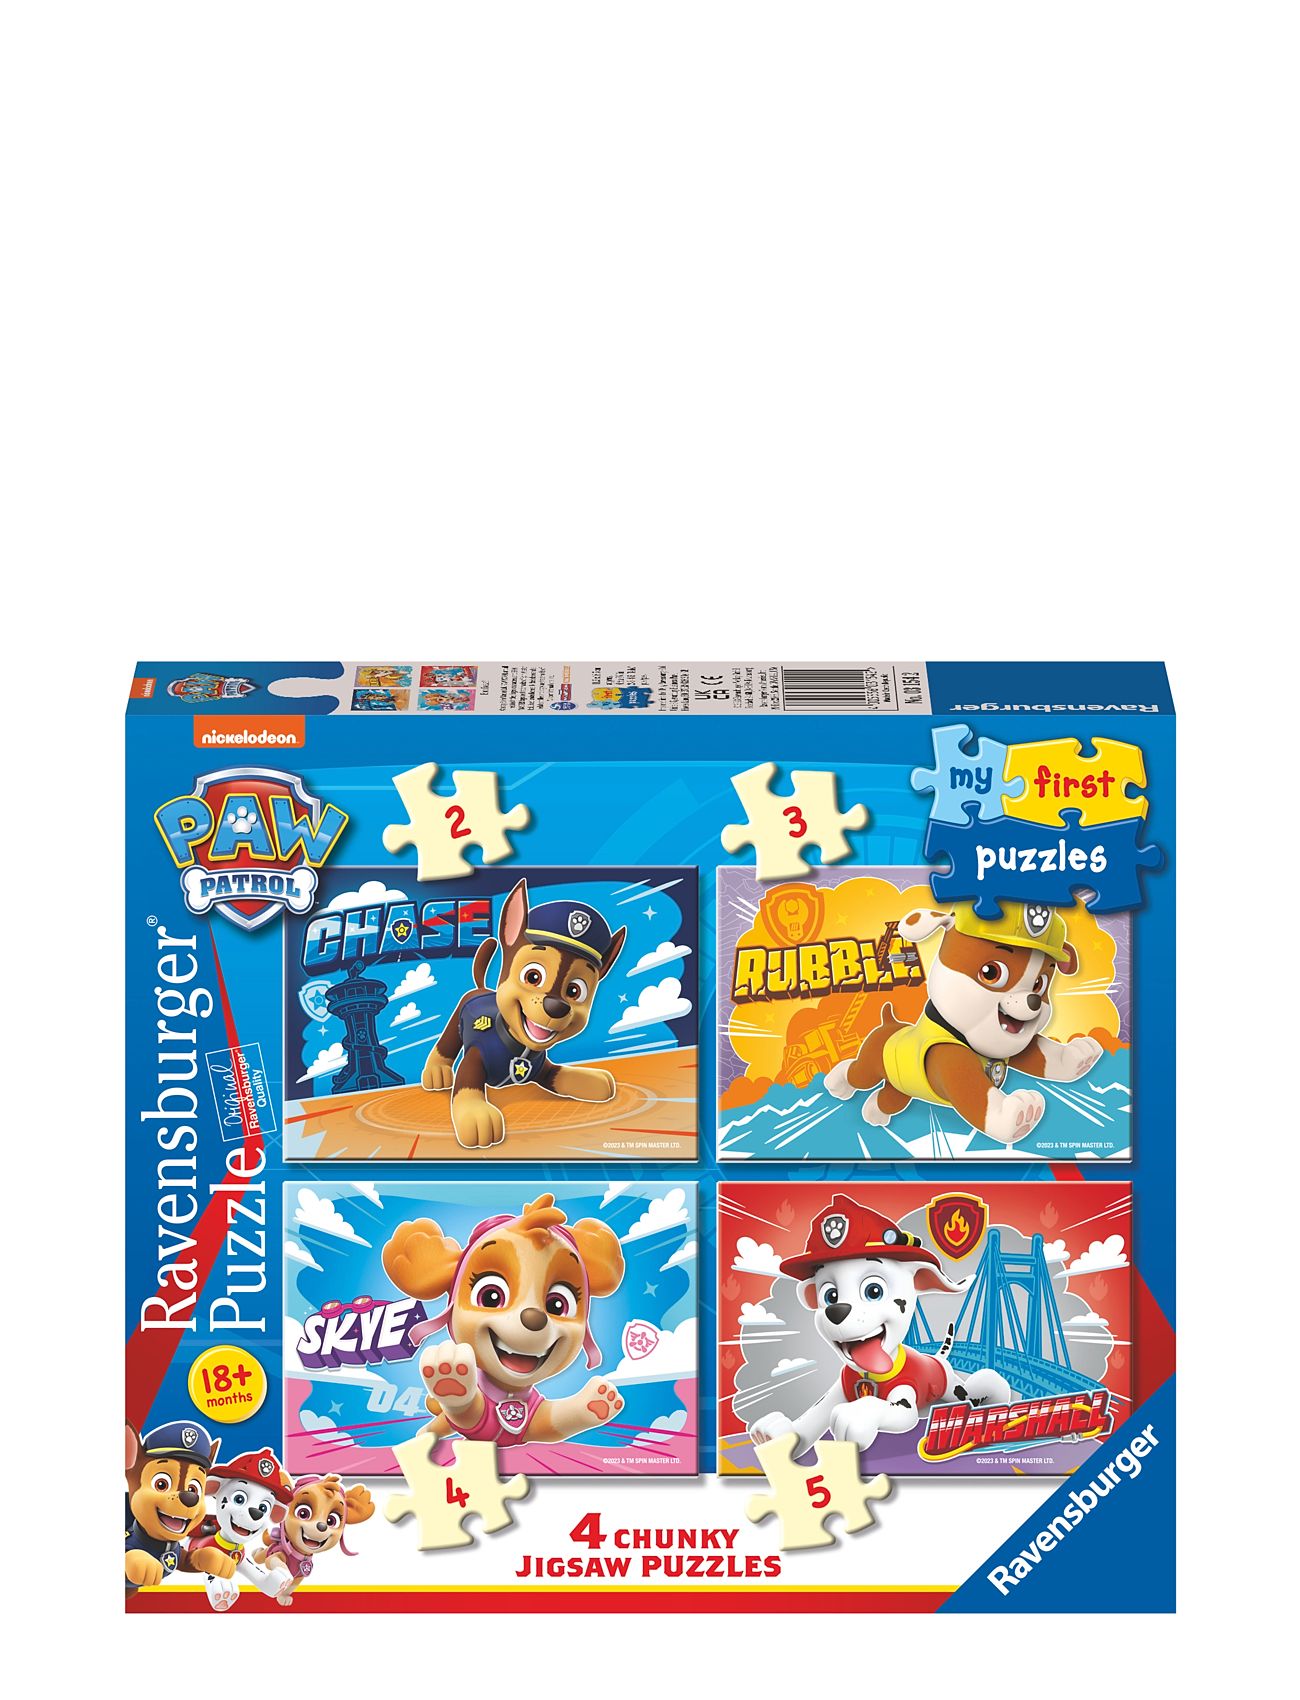 Paw Patrol My First Puzzle 2/3/4/5P Toys Puzzles And Games Puzzles Classic Puzzles Multi/patterned Ravensburger